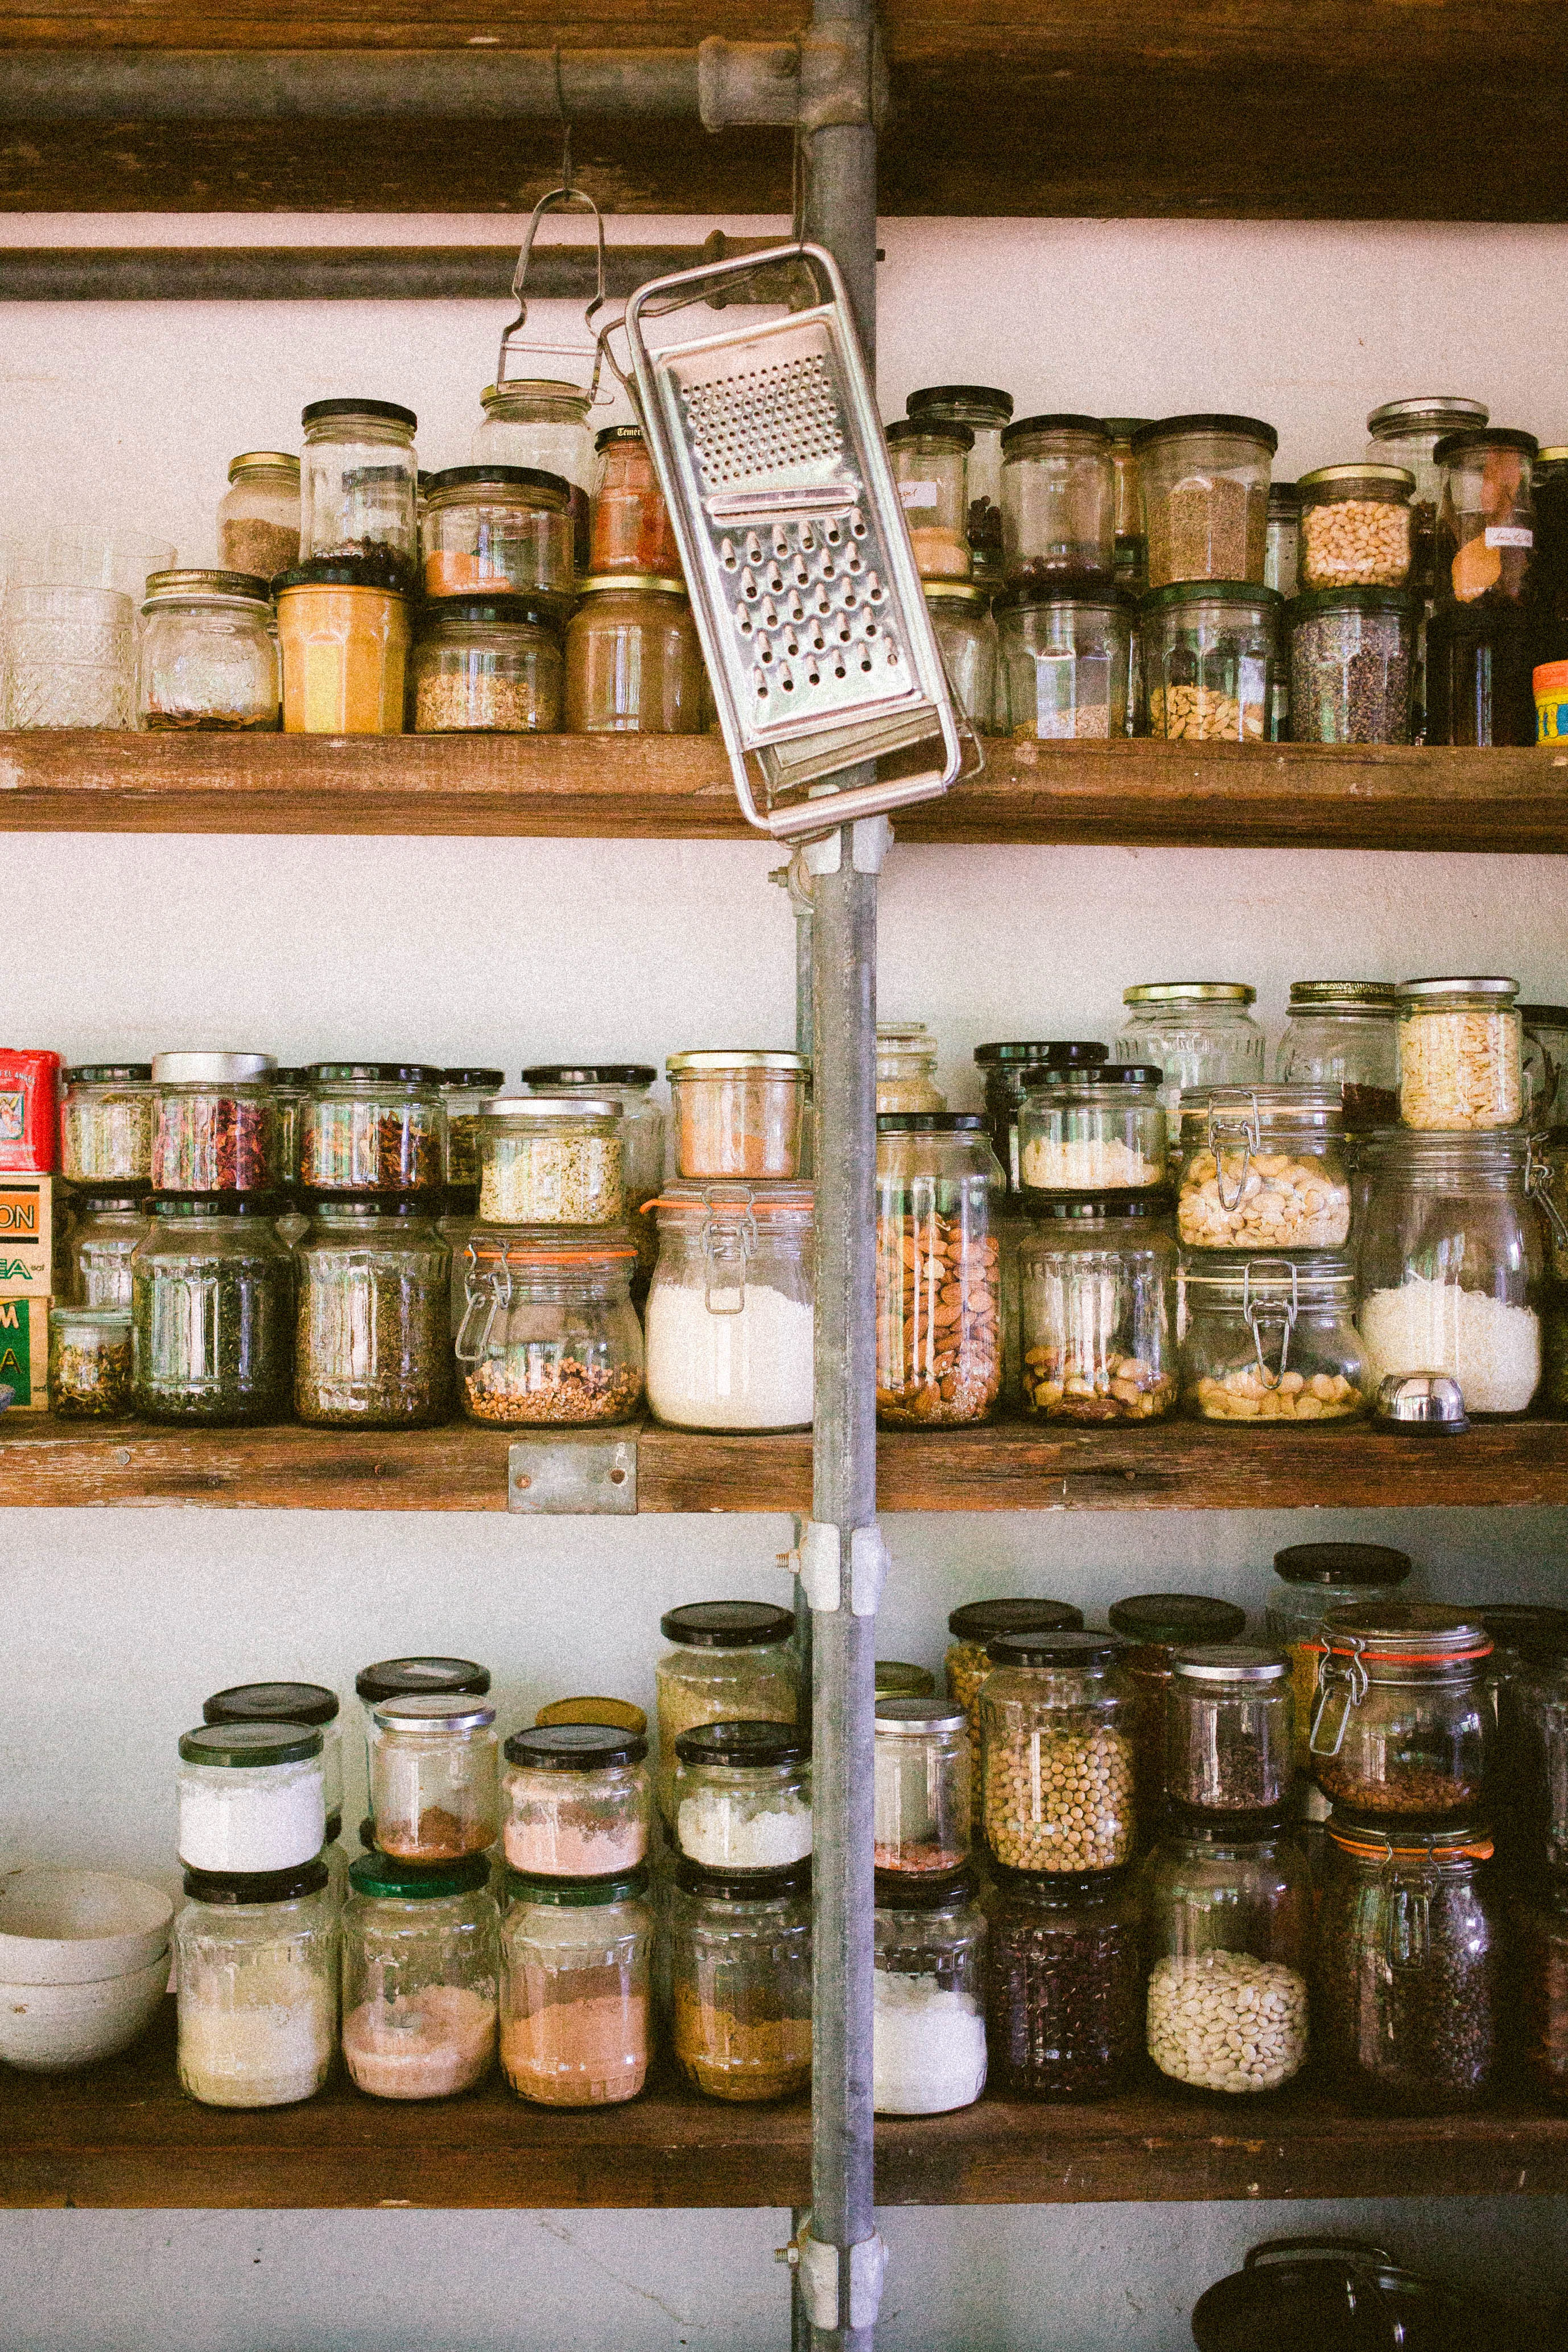 Three shelves with glass jars of ingredients on it, a grater hangs from a shelf.